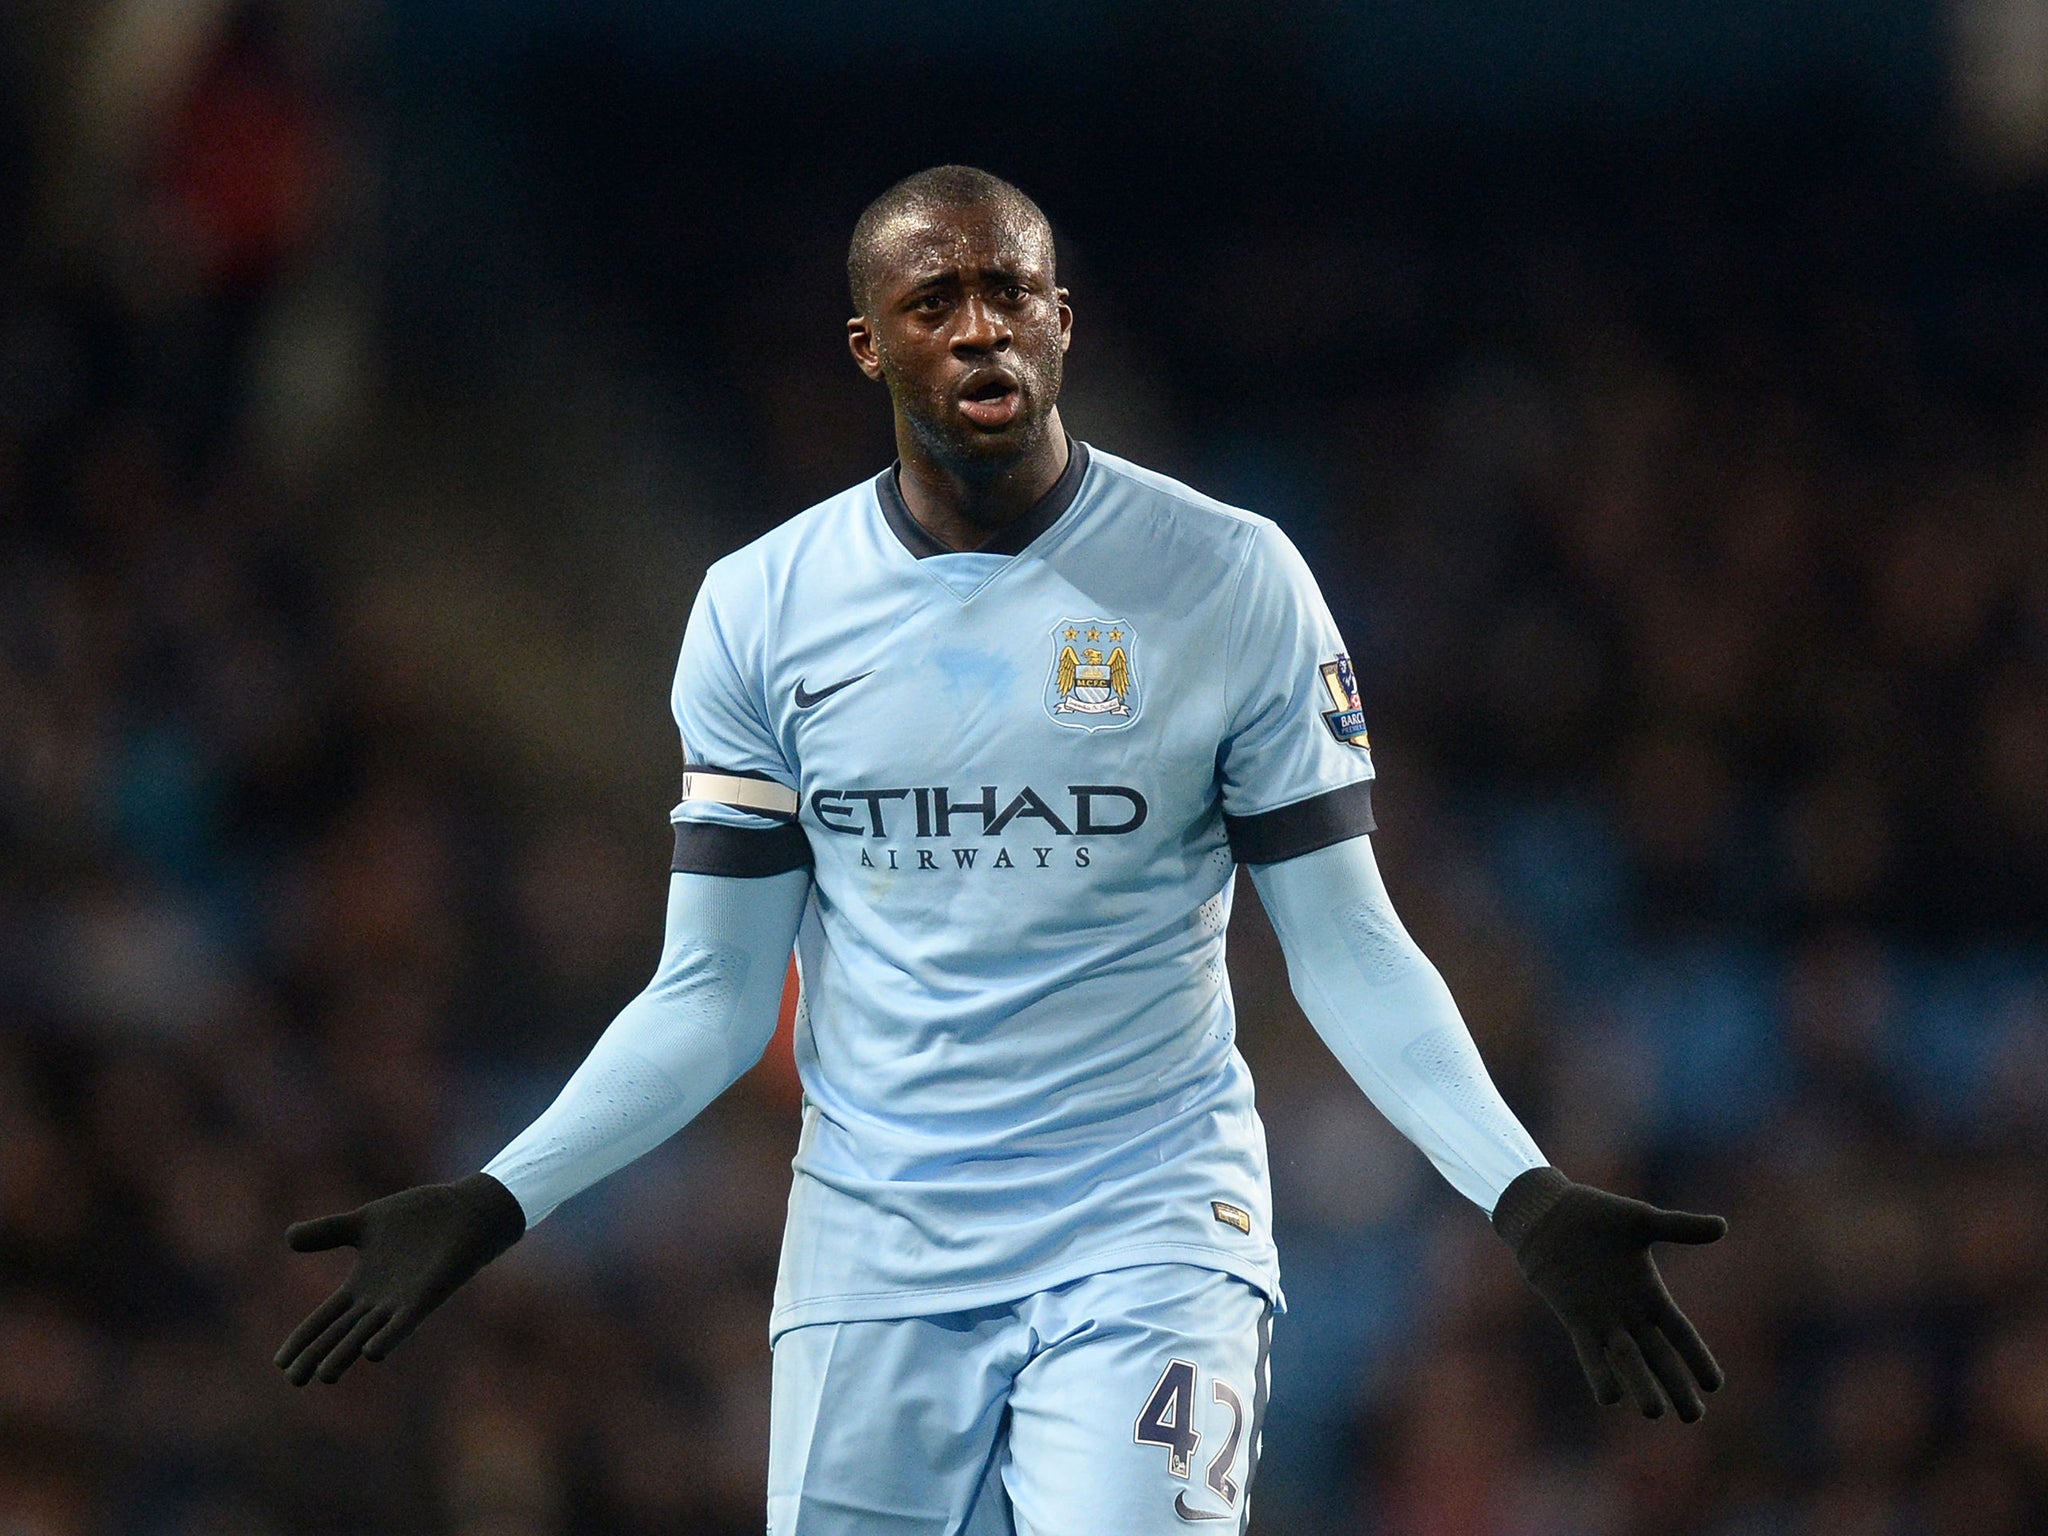 Yaya Touré is a target for Internazionale but Juventus and Real Madrid could be interested too